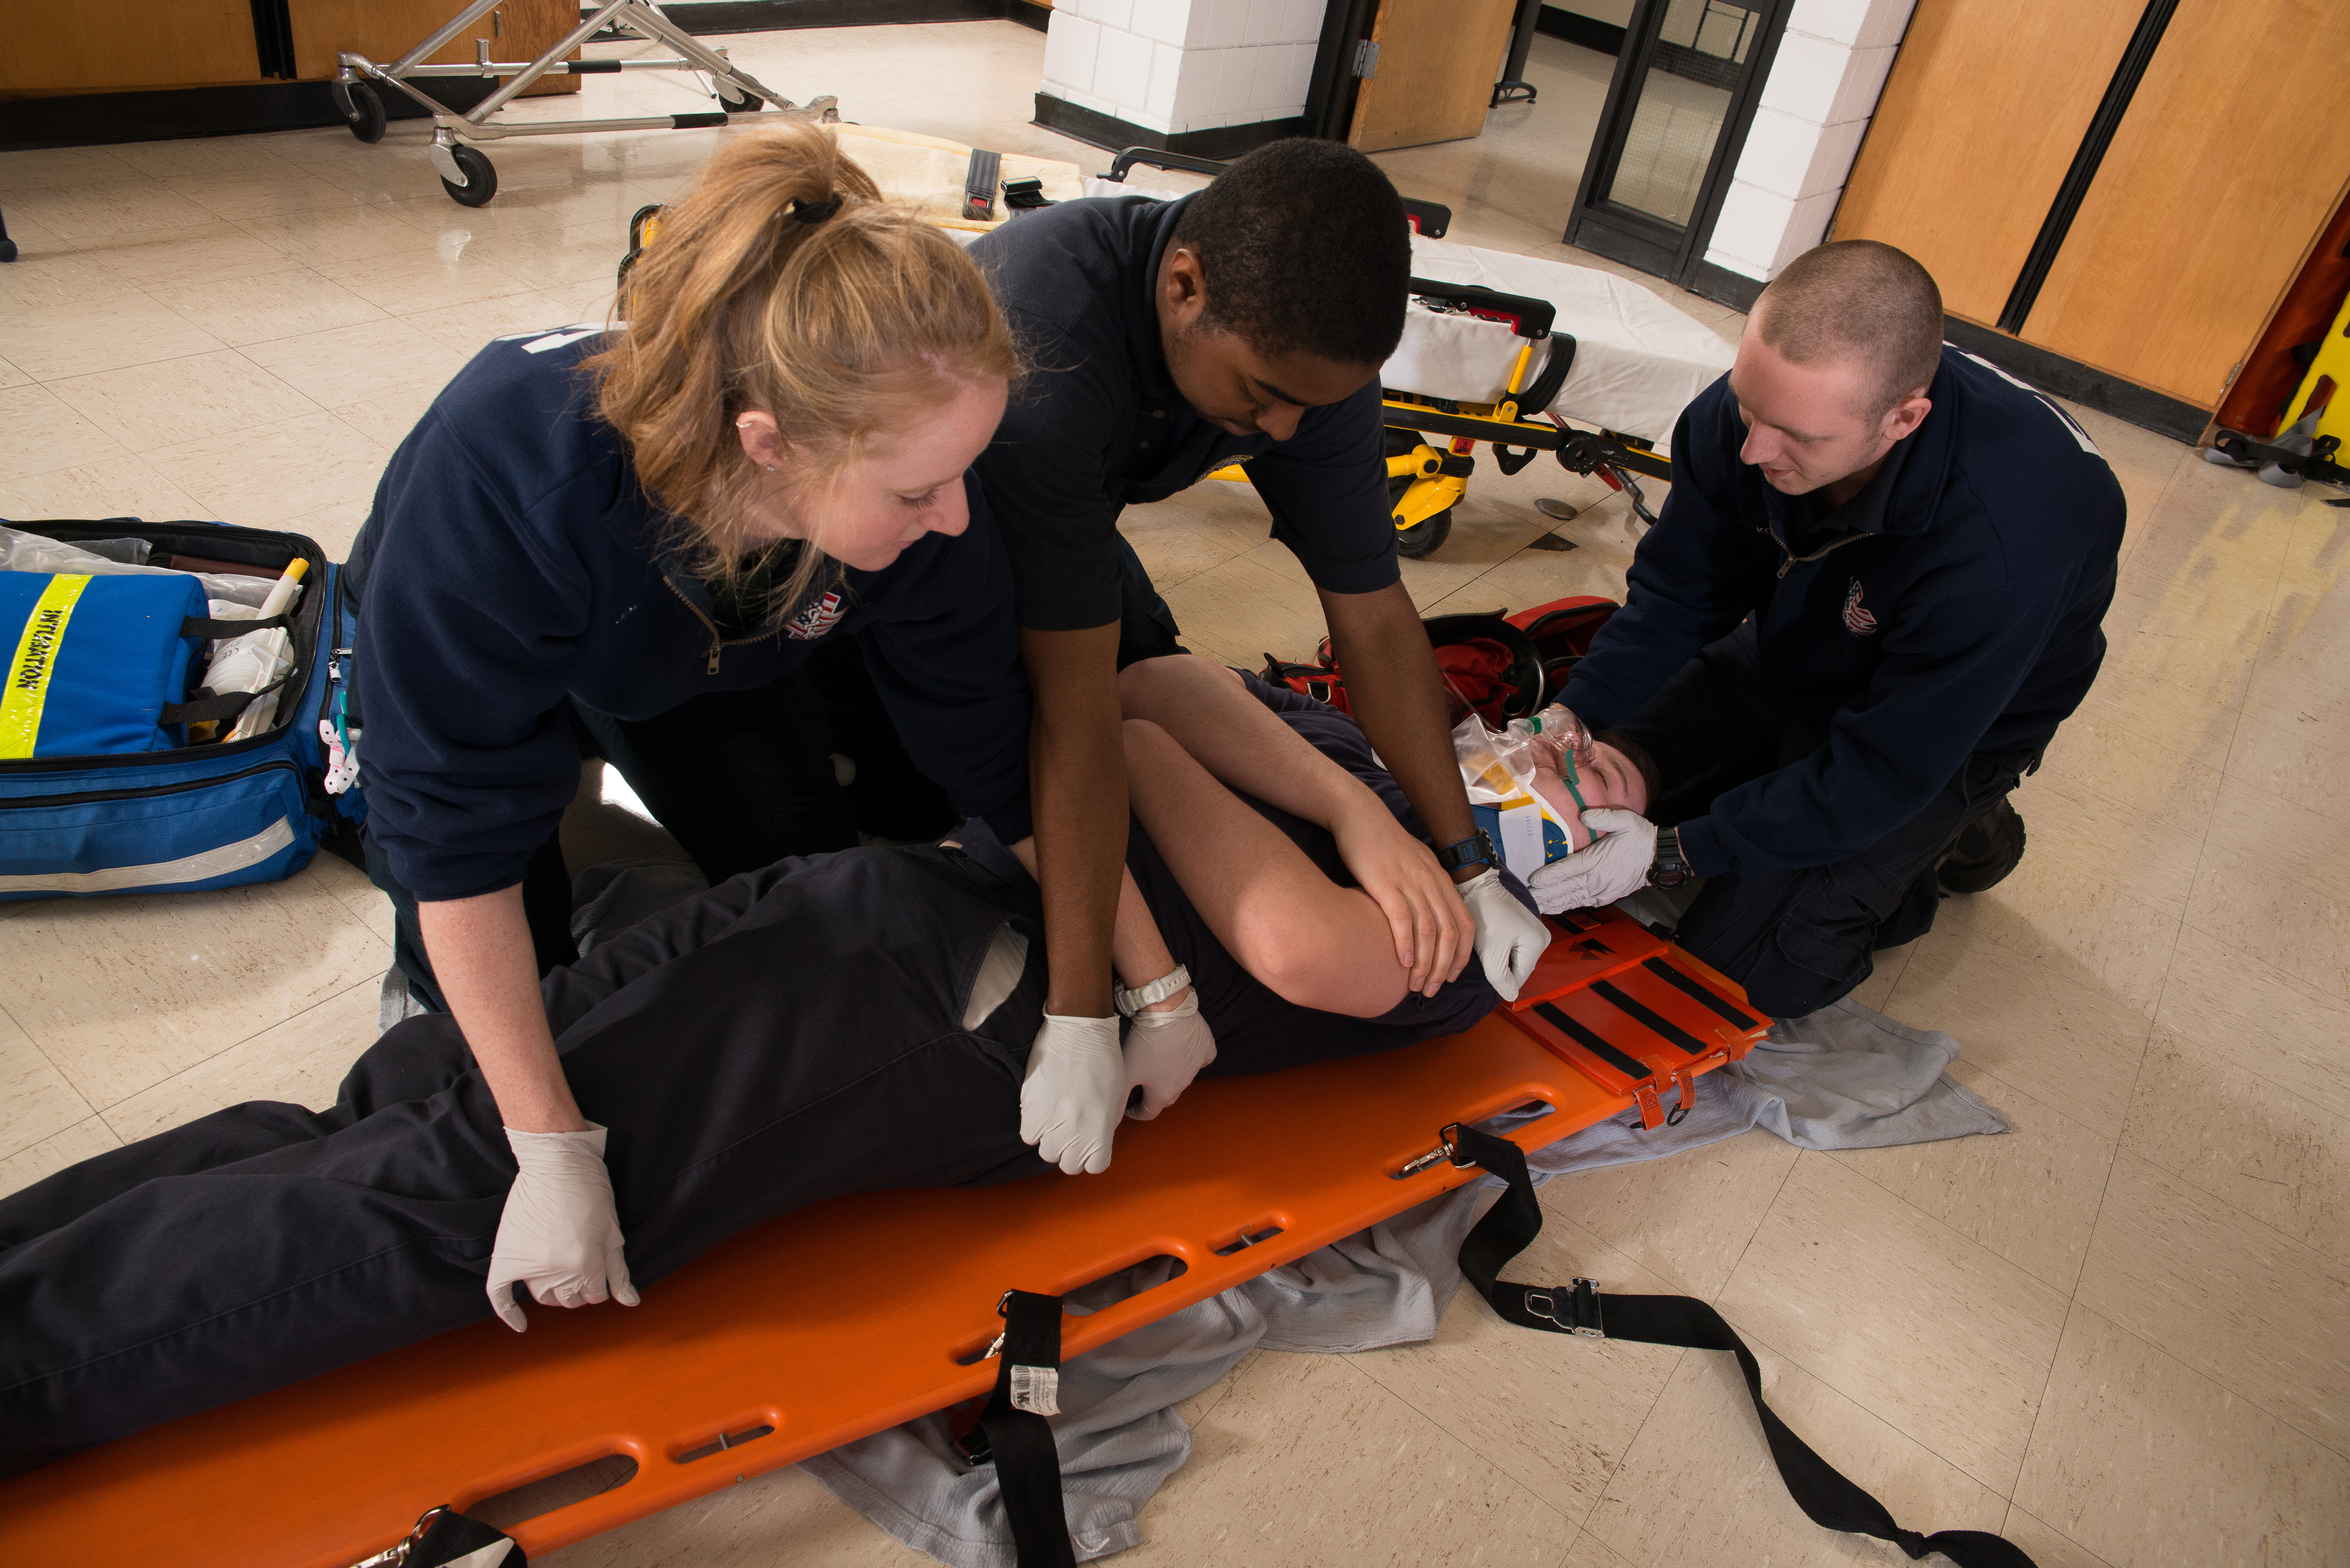 Three EMT students working on patient on stretcher